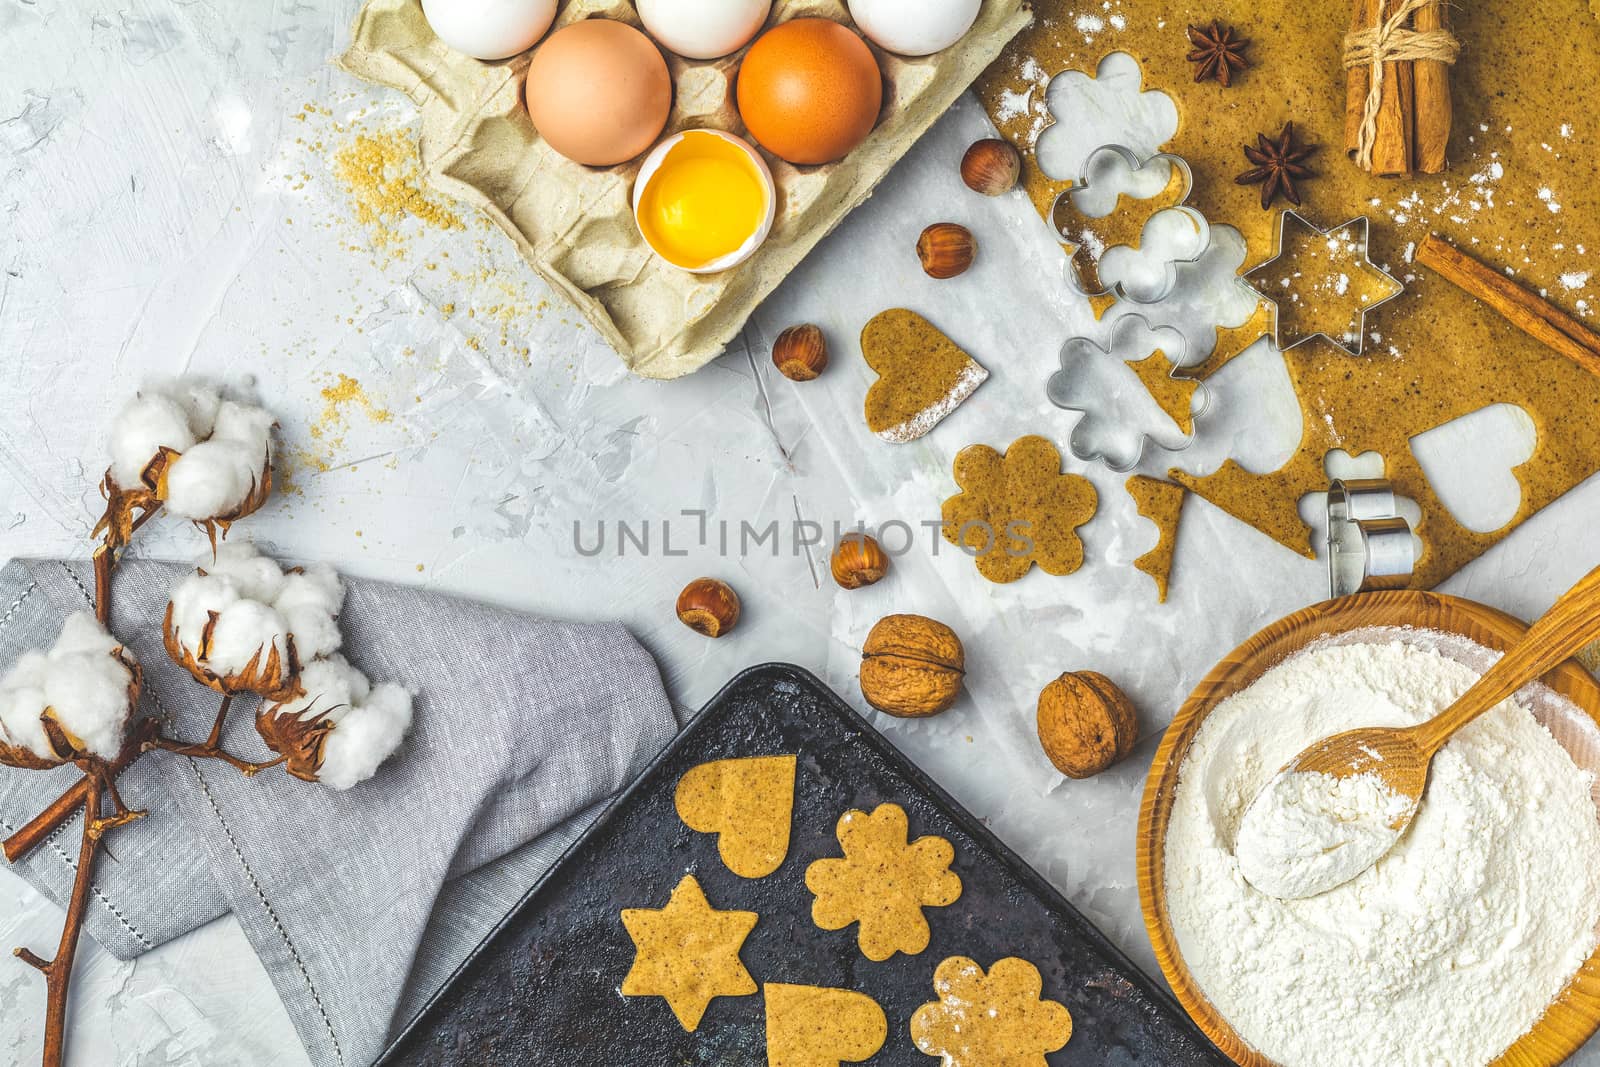 Ingredients for ginger cookies. Dough for baking by ArtSvitlyna